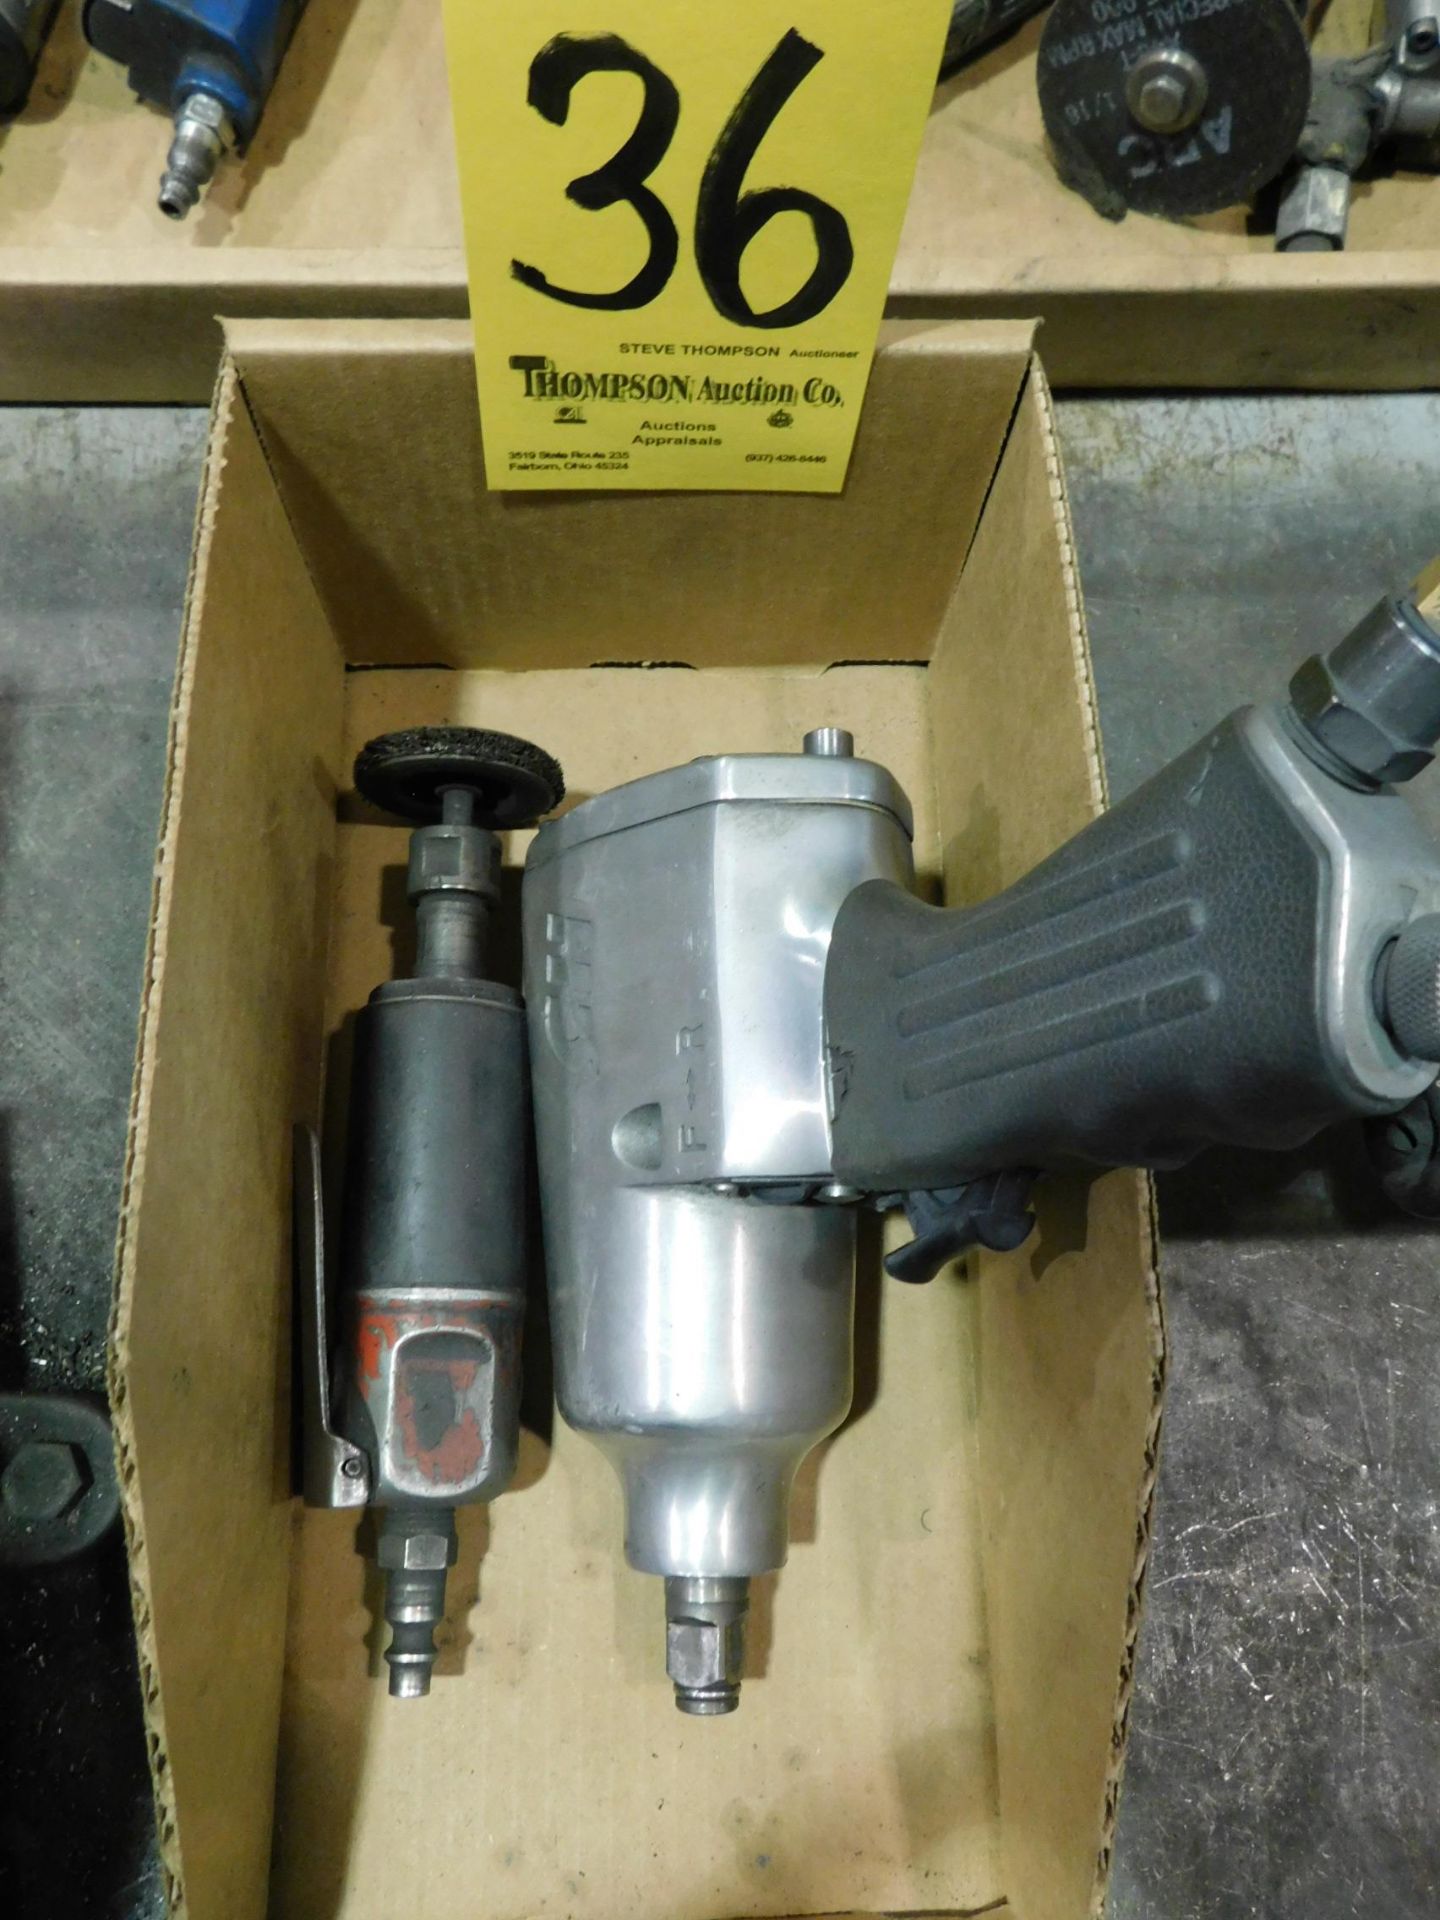 Pneumatic 1/2" Impact Wrench and Grinder